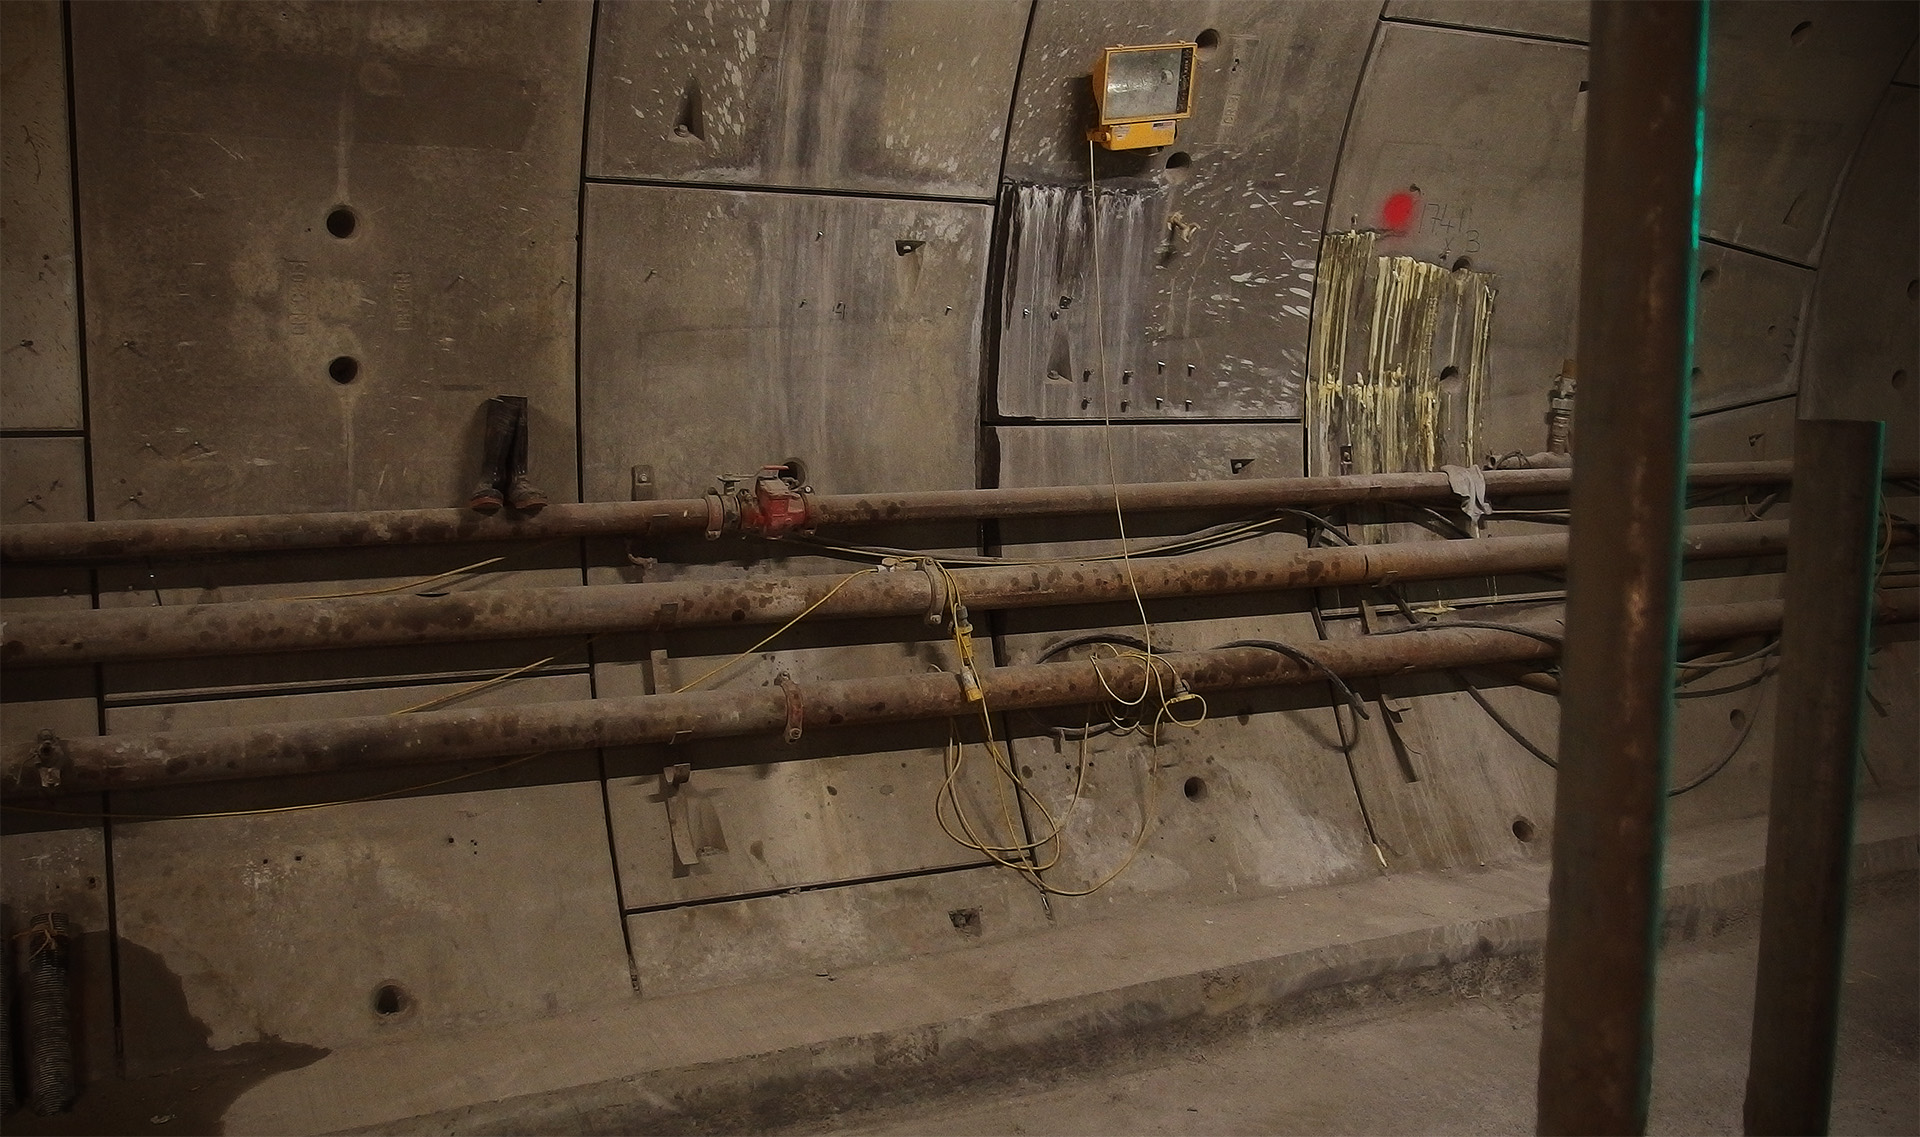 A pair of boots is sat on pipes mounted to the tunnel wall